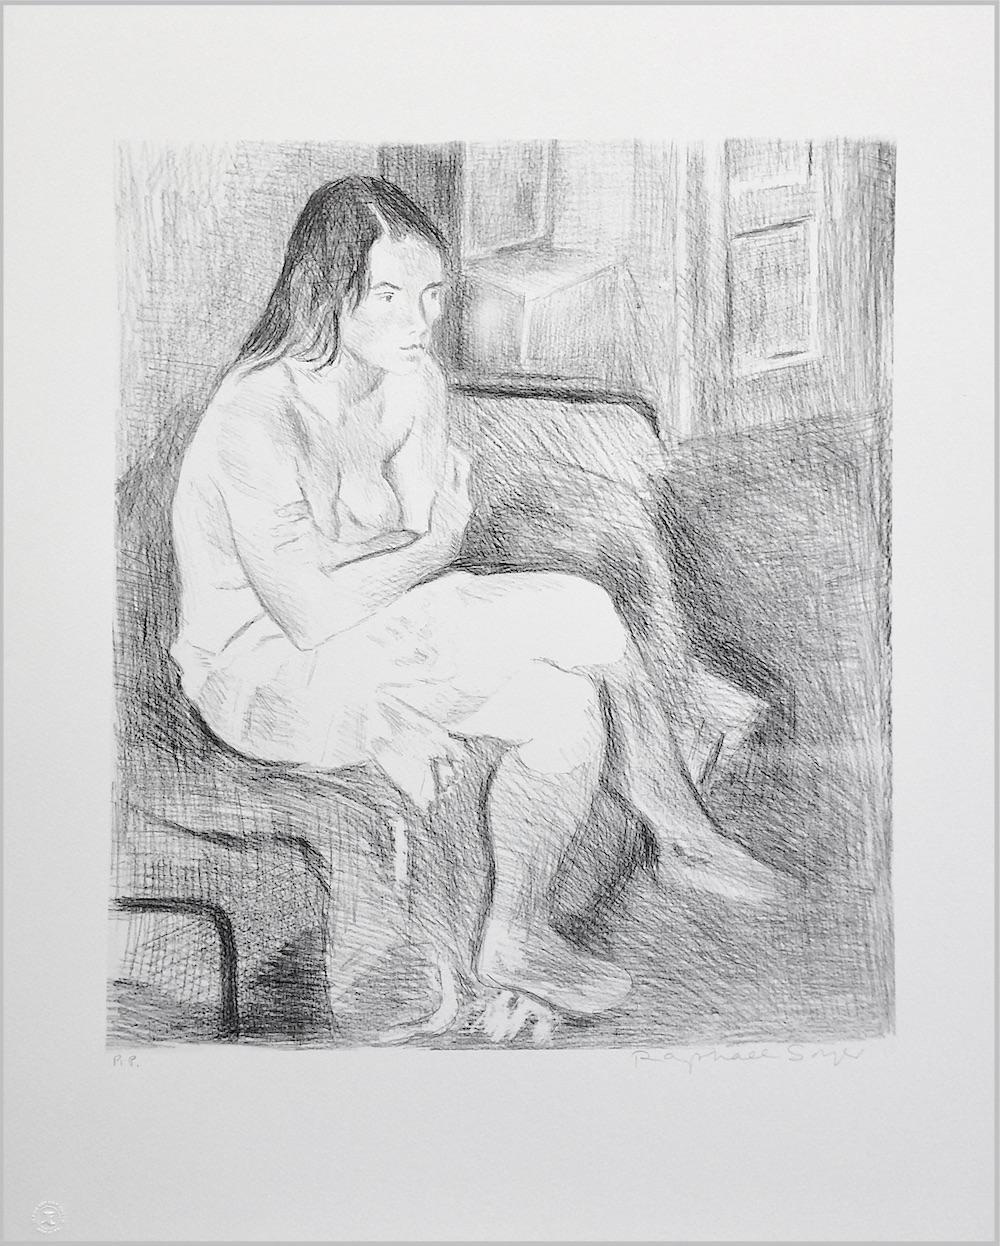 SEATED WOMAN PINK SOCKS is an original hand drawn (not digitally or photo reproduced) limited edition lithograph by the artist Raphael Soyer - Russian/American Social Realism Painter, 1899-1987. Printed using traditional hand lithography techniques